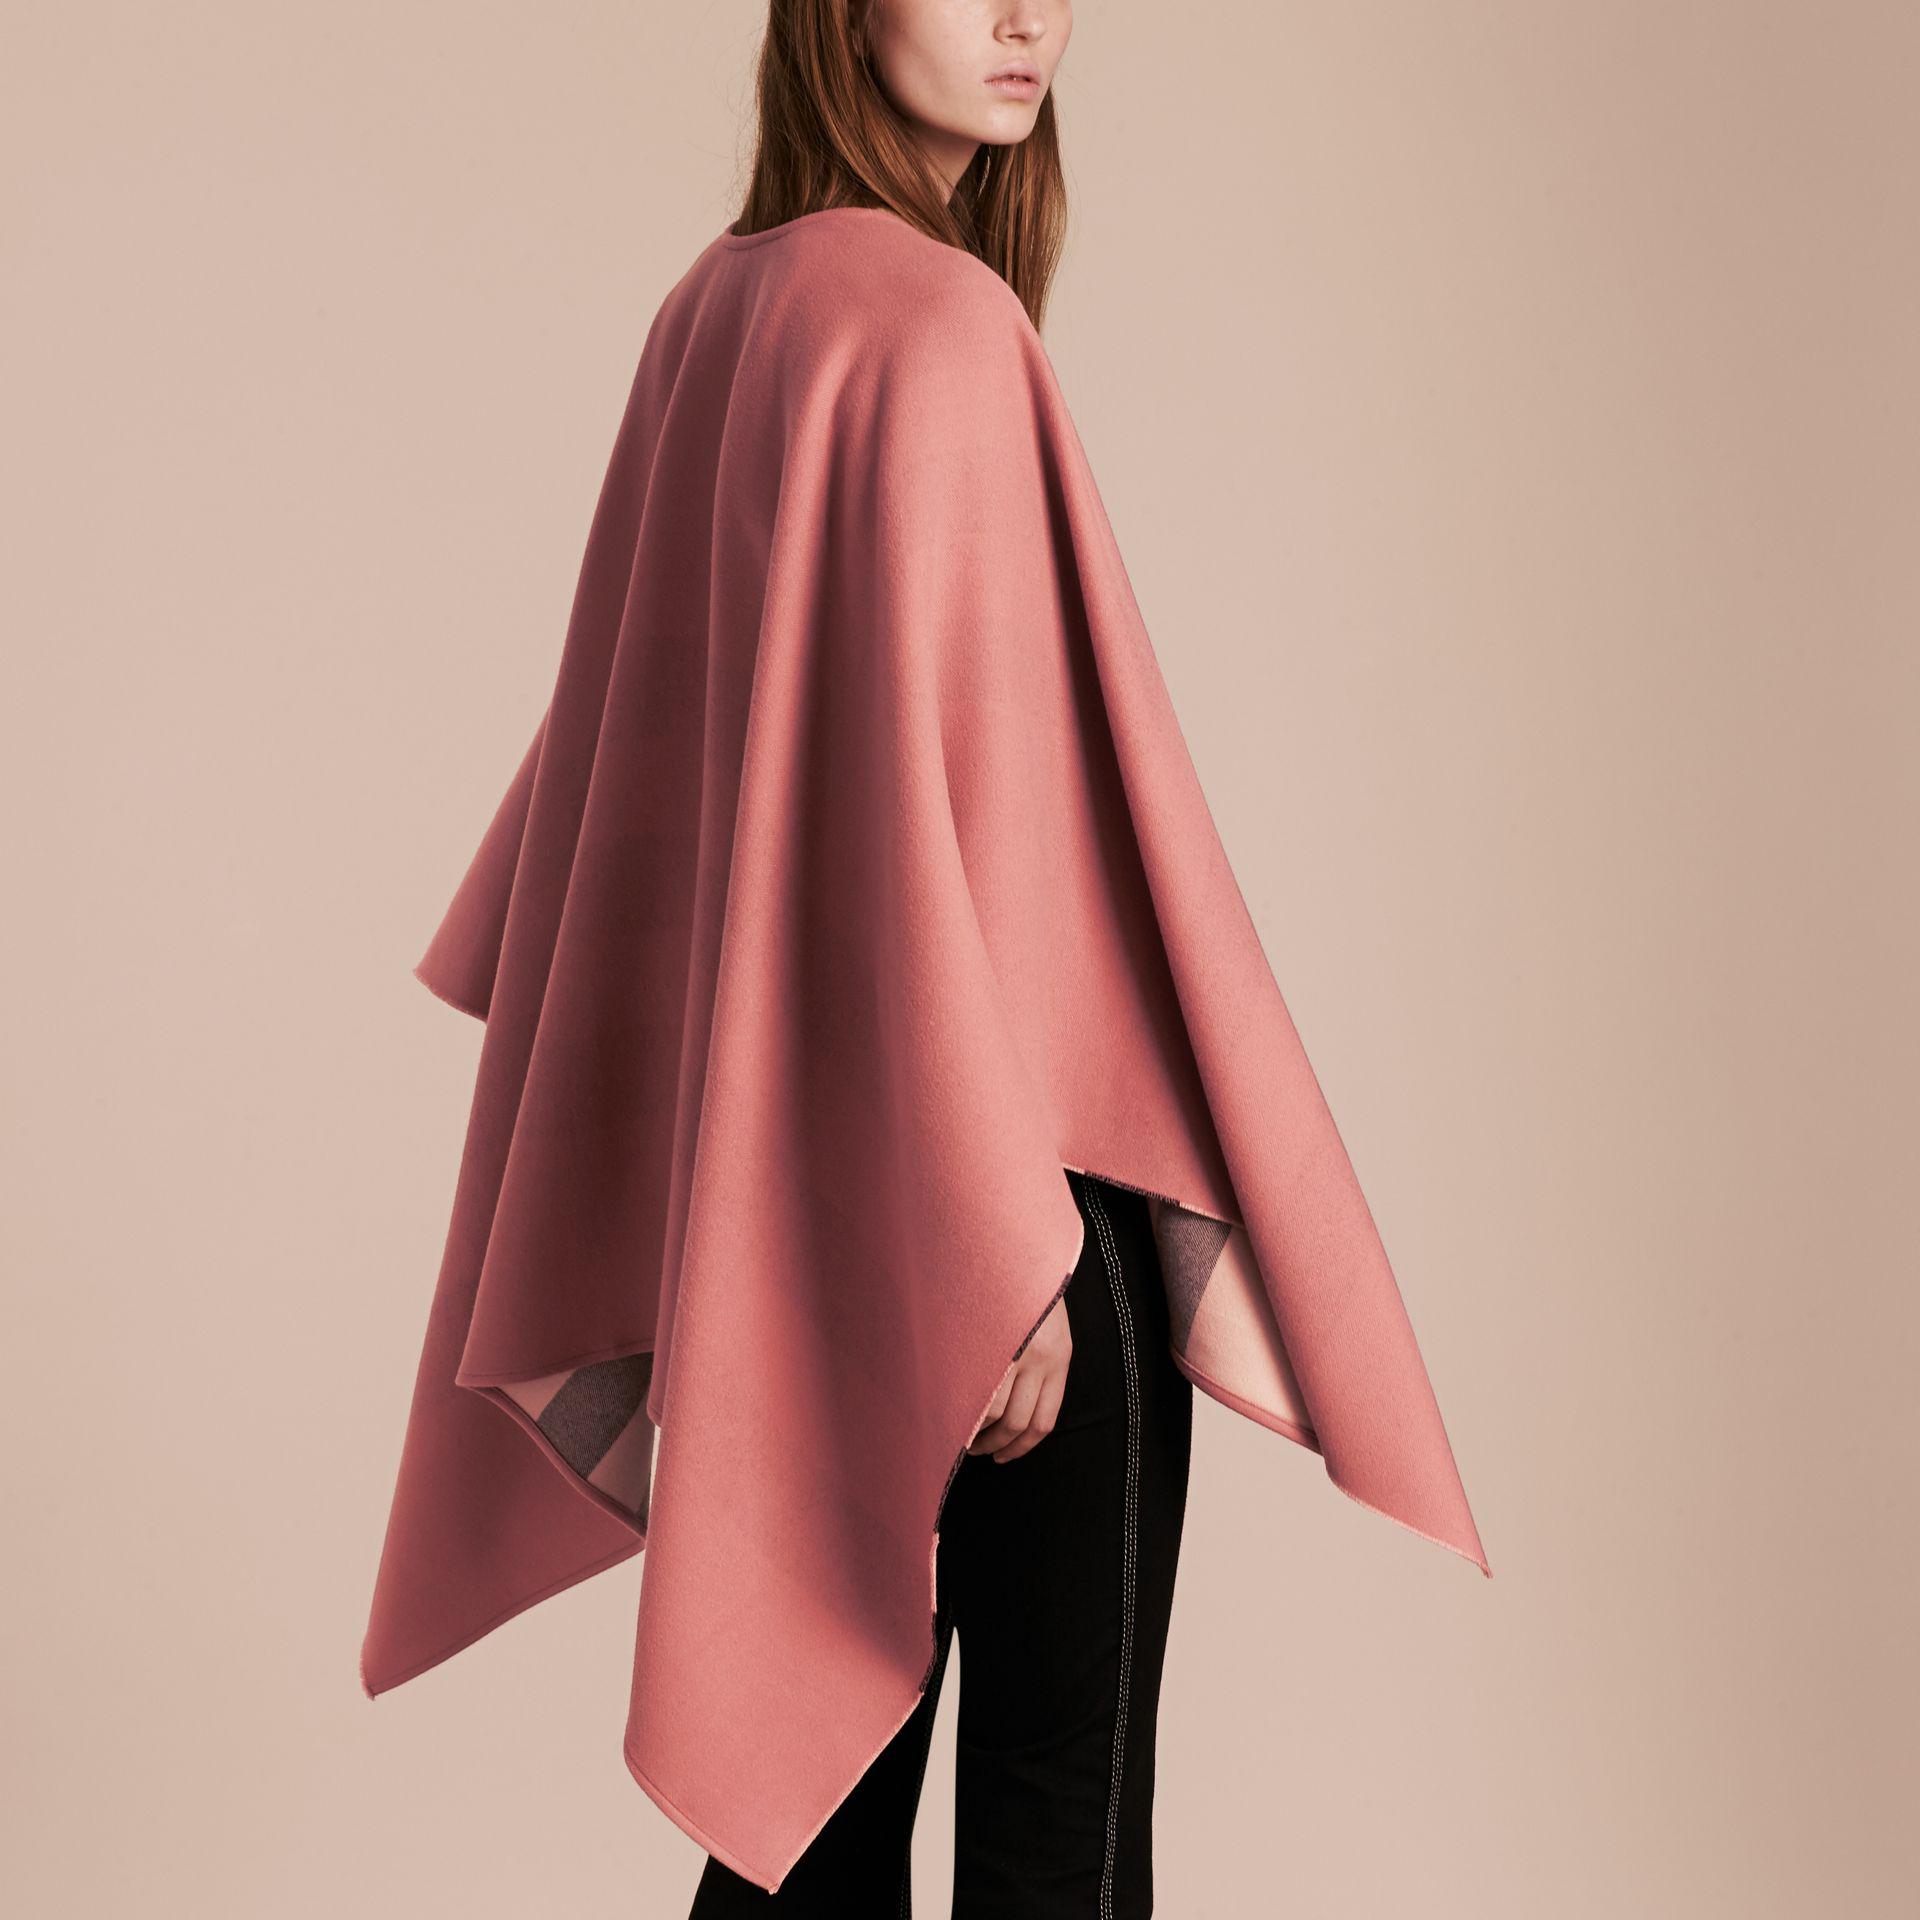 Burberry Reversible Check Merino Wool Poncho in Pink | Lyst